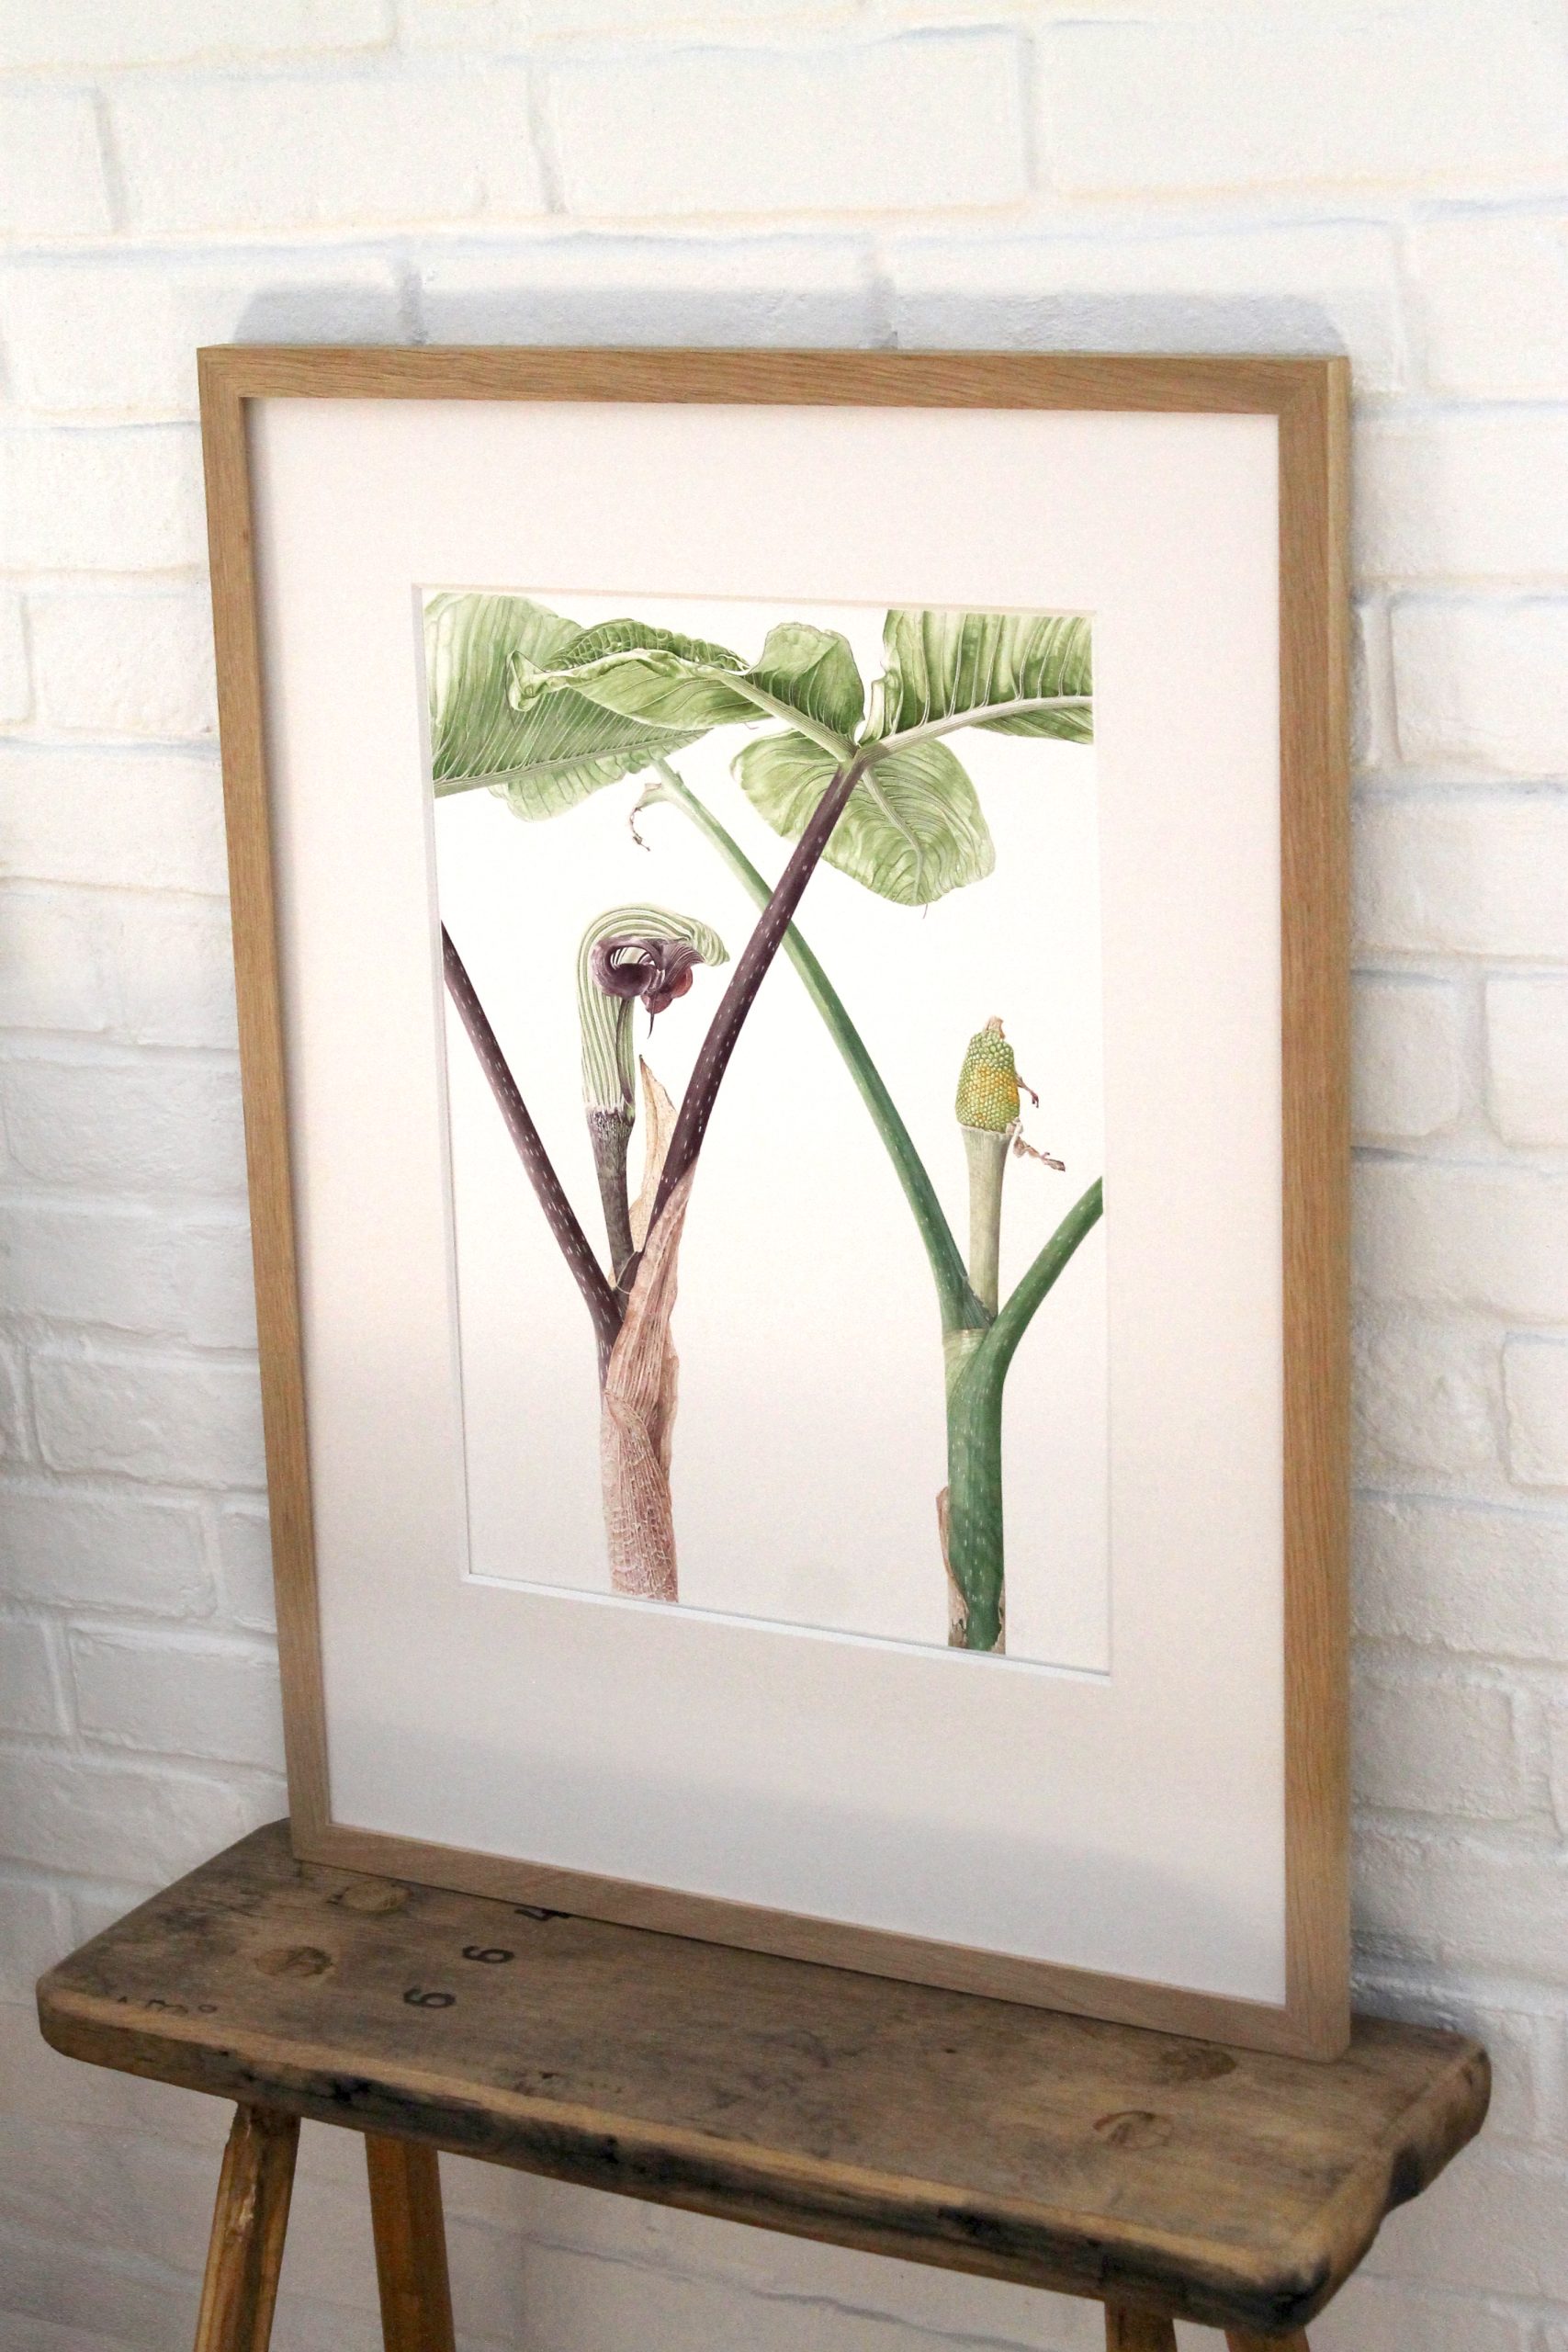 Arisaema ringens - watercolor painting by Marianne Hazlewood framed, sitting on a stool